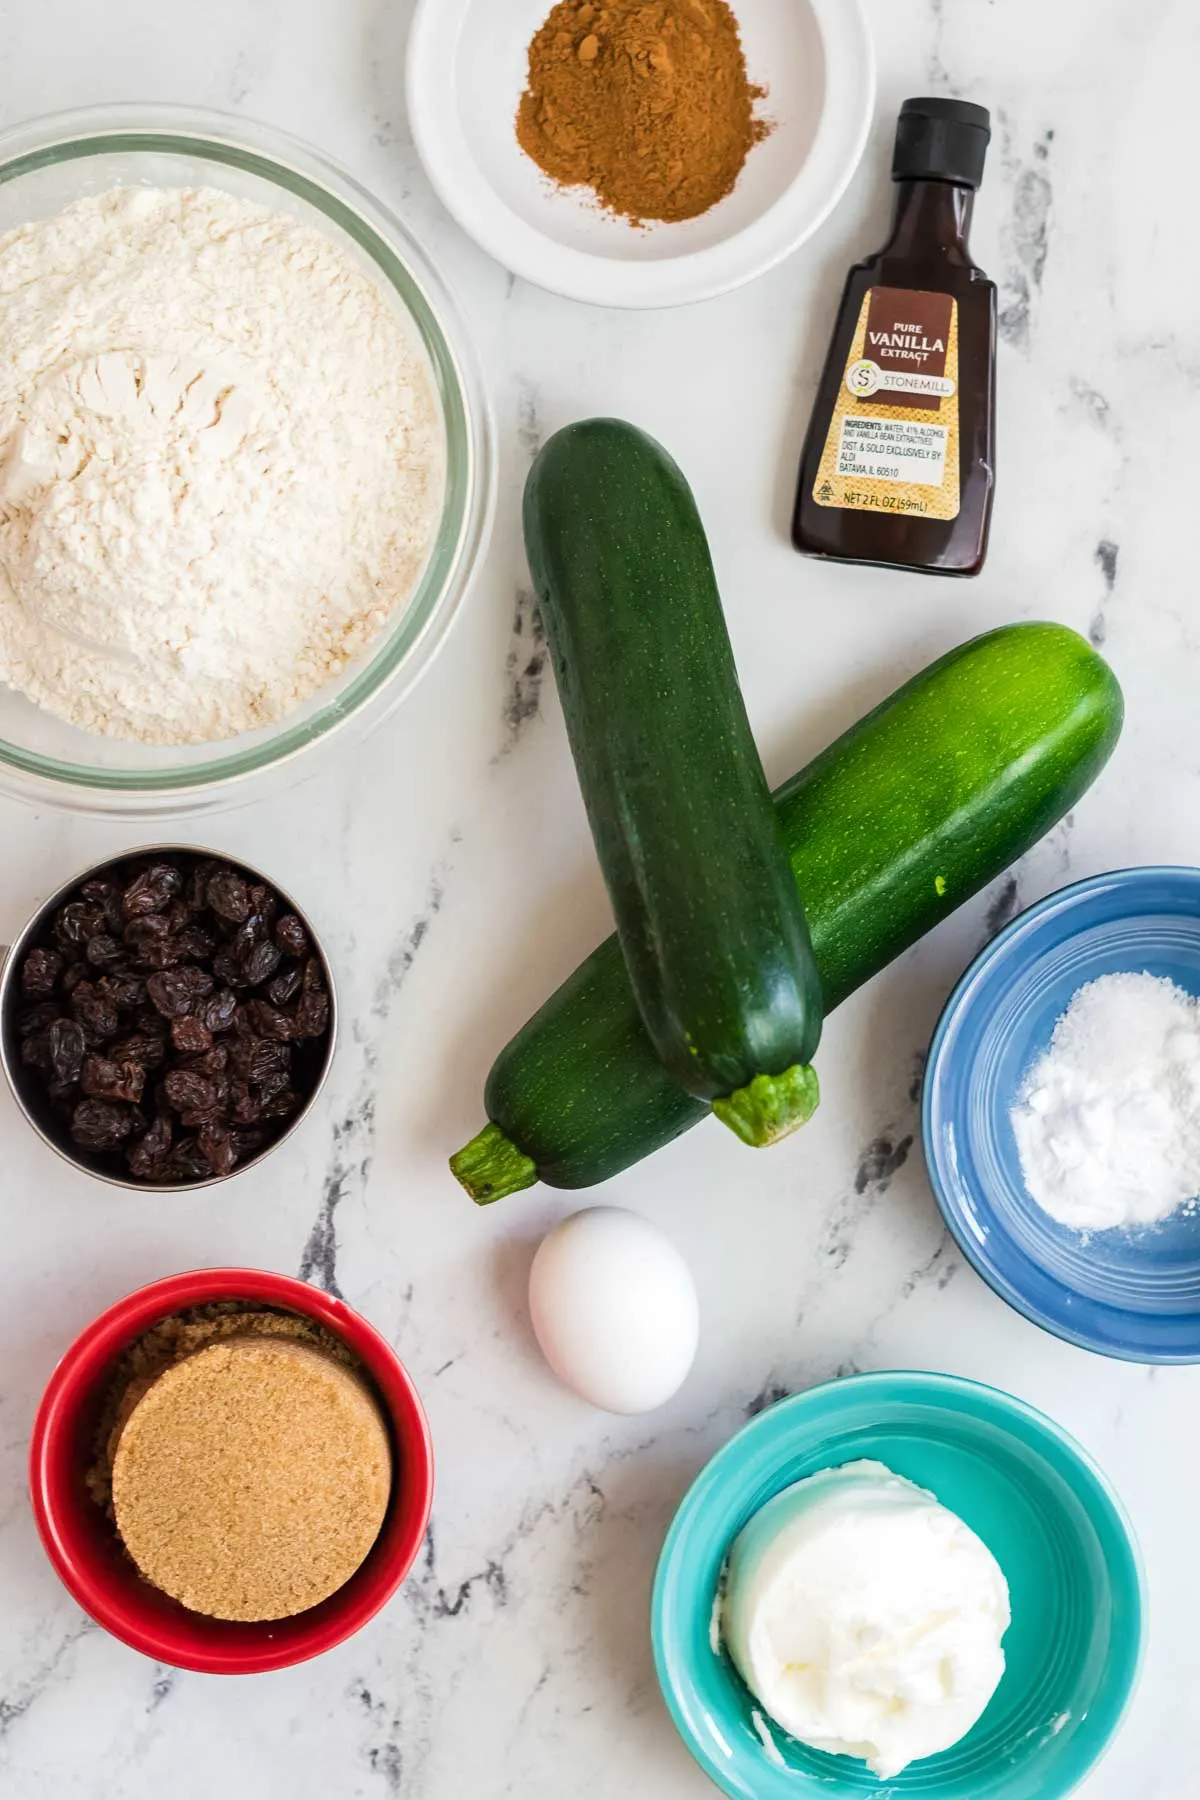 Ingredients to make spiced zucchini cookies.